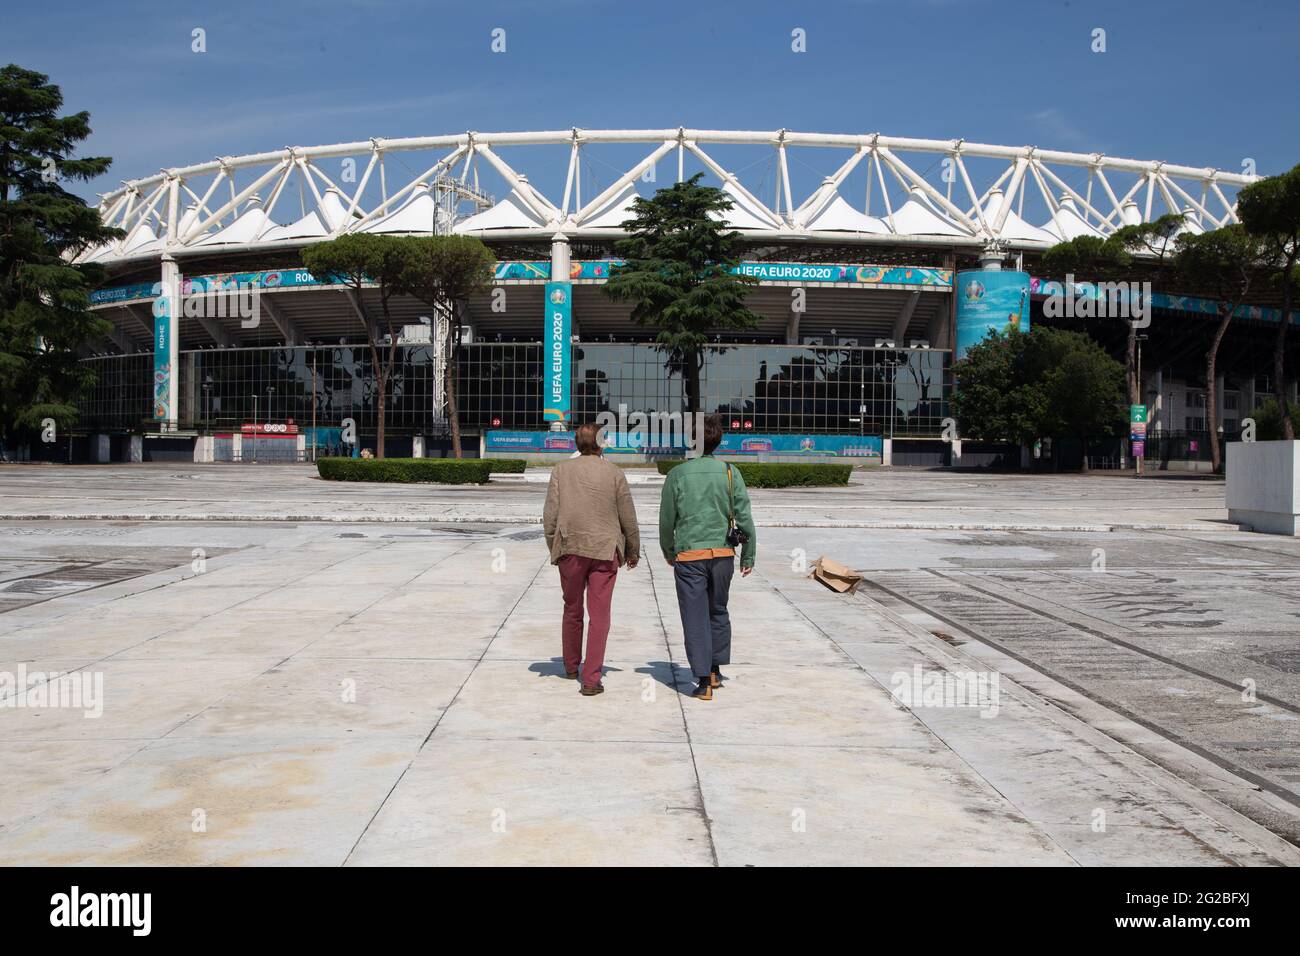 Rome, Italy. 10th June, 2021. View of Olympic Stadium in Rome. Olympic Stadium in Rome will host tomorrow evening, Friday 11 June 2021, inaugural match of European Football Championships, which should have been played in 2020 but, due to covid-19 pandemic, will be played this year (Photo by Matteo Nardone/Pacific Press) Credit: Pacific Press Media Production Corp./Alamy Live News Stock Photo